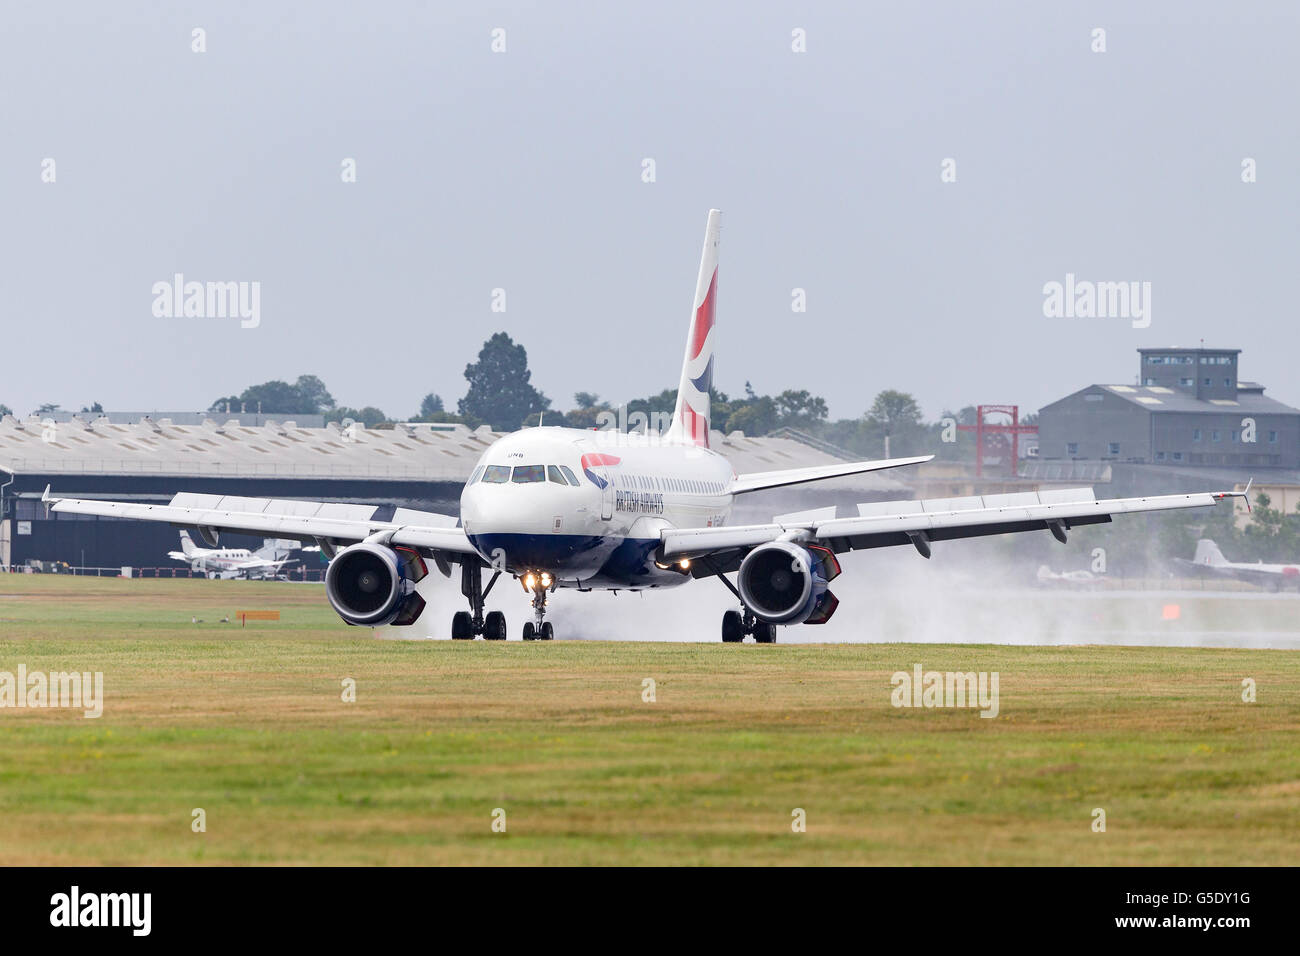 British Airways Airbus A318-112 aircraft arriving for static display at the Farnborough International Airshow G-EUNB Stock Photo